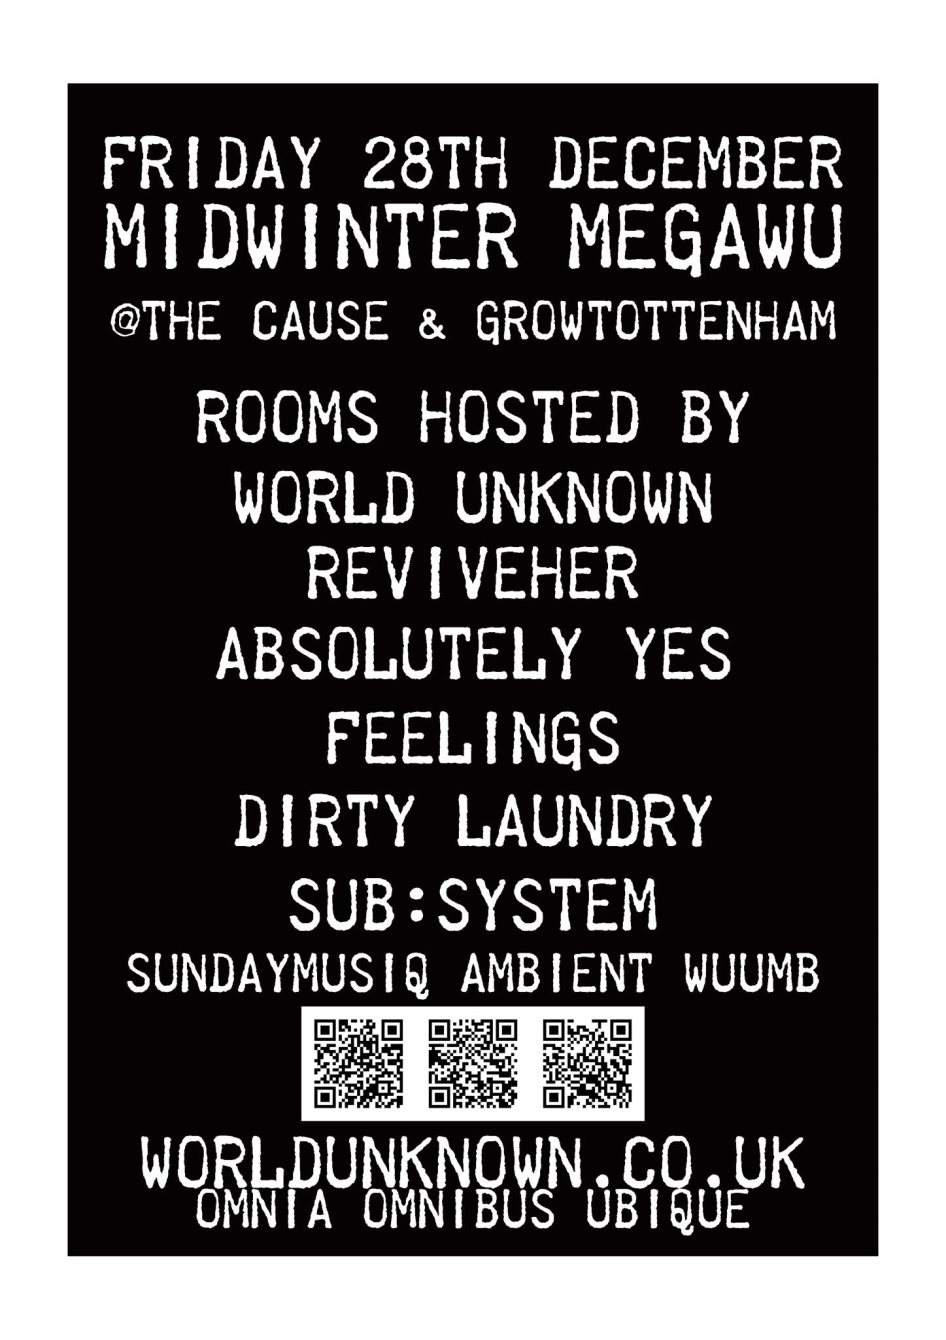 World Unknown x REVIVEHER Mega Rave - 6 Room Madness Ft. Lovefingers, Heidi Lawden + Many More - Página frontal